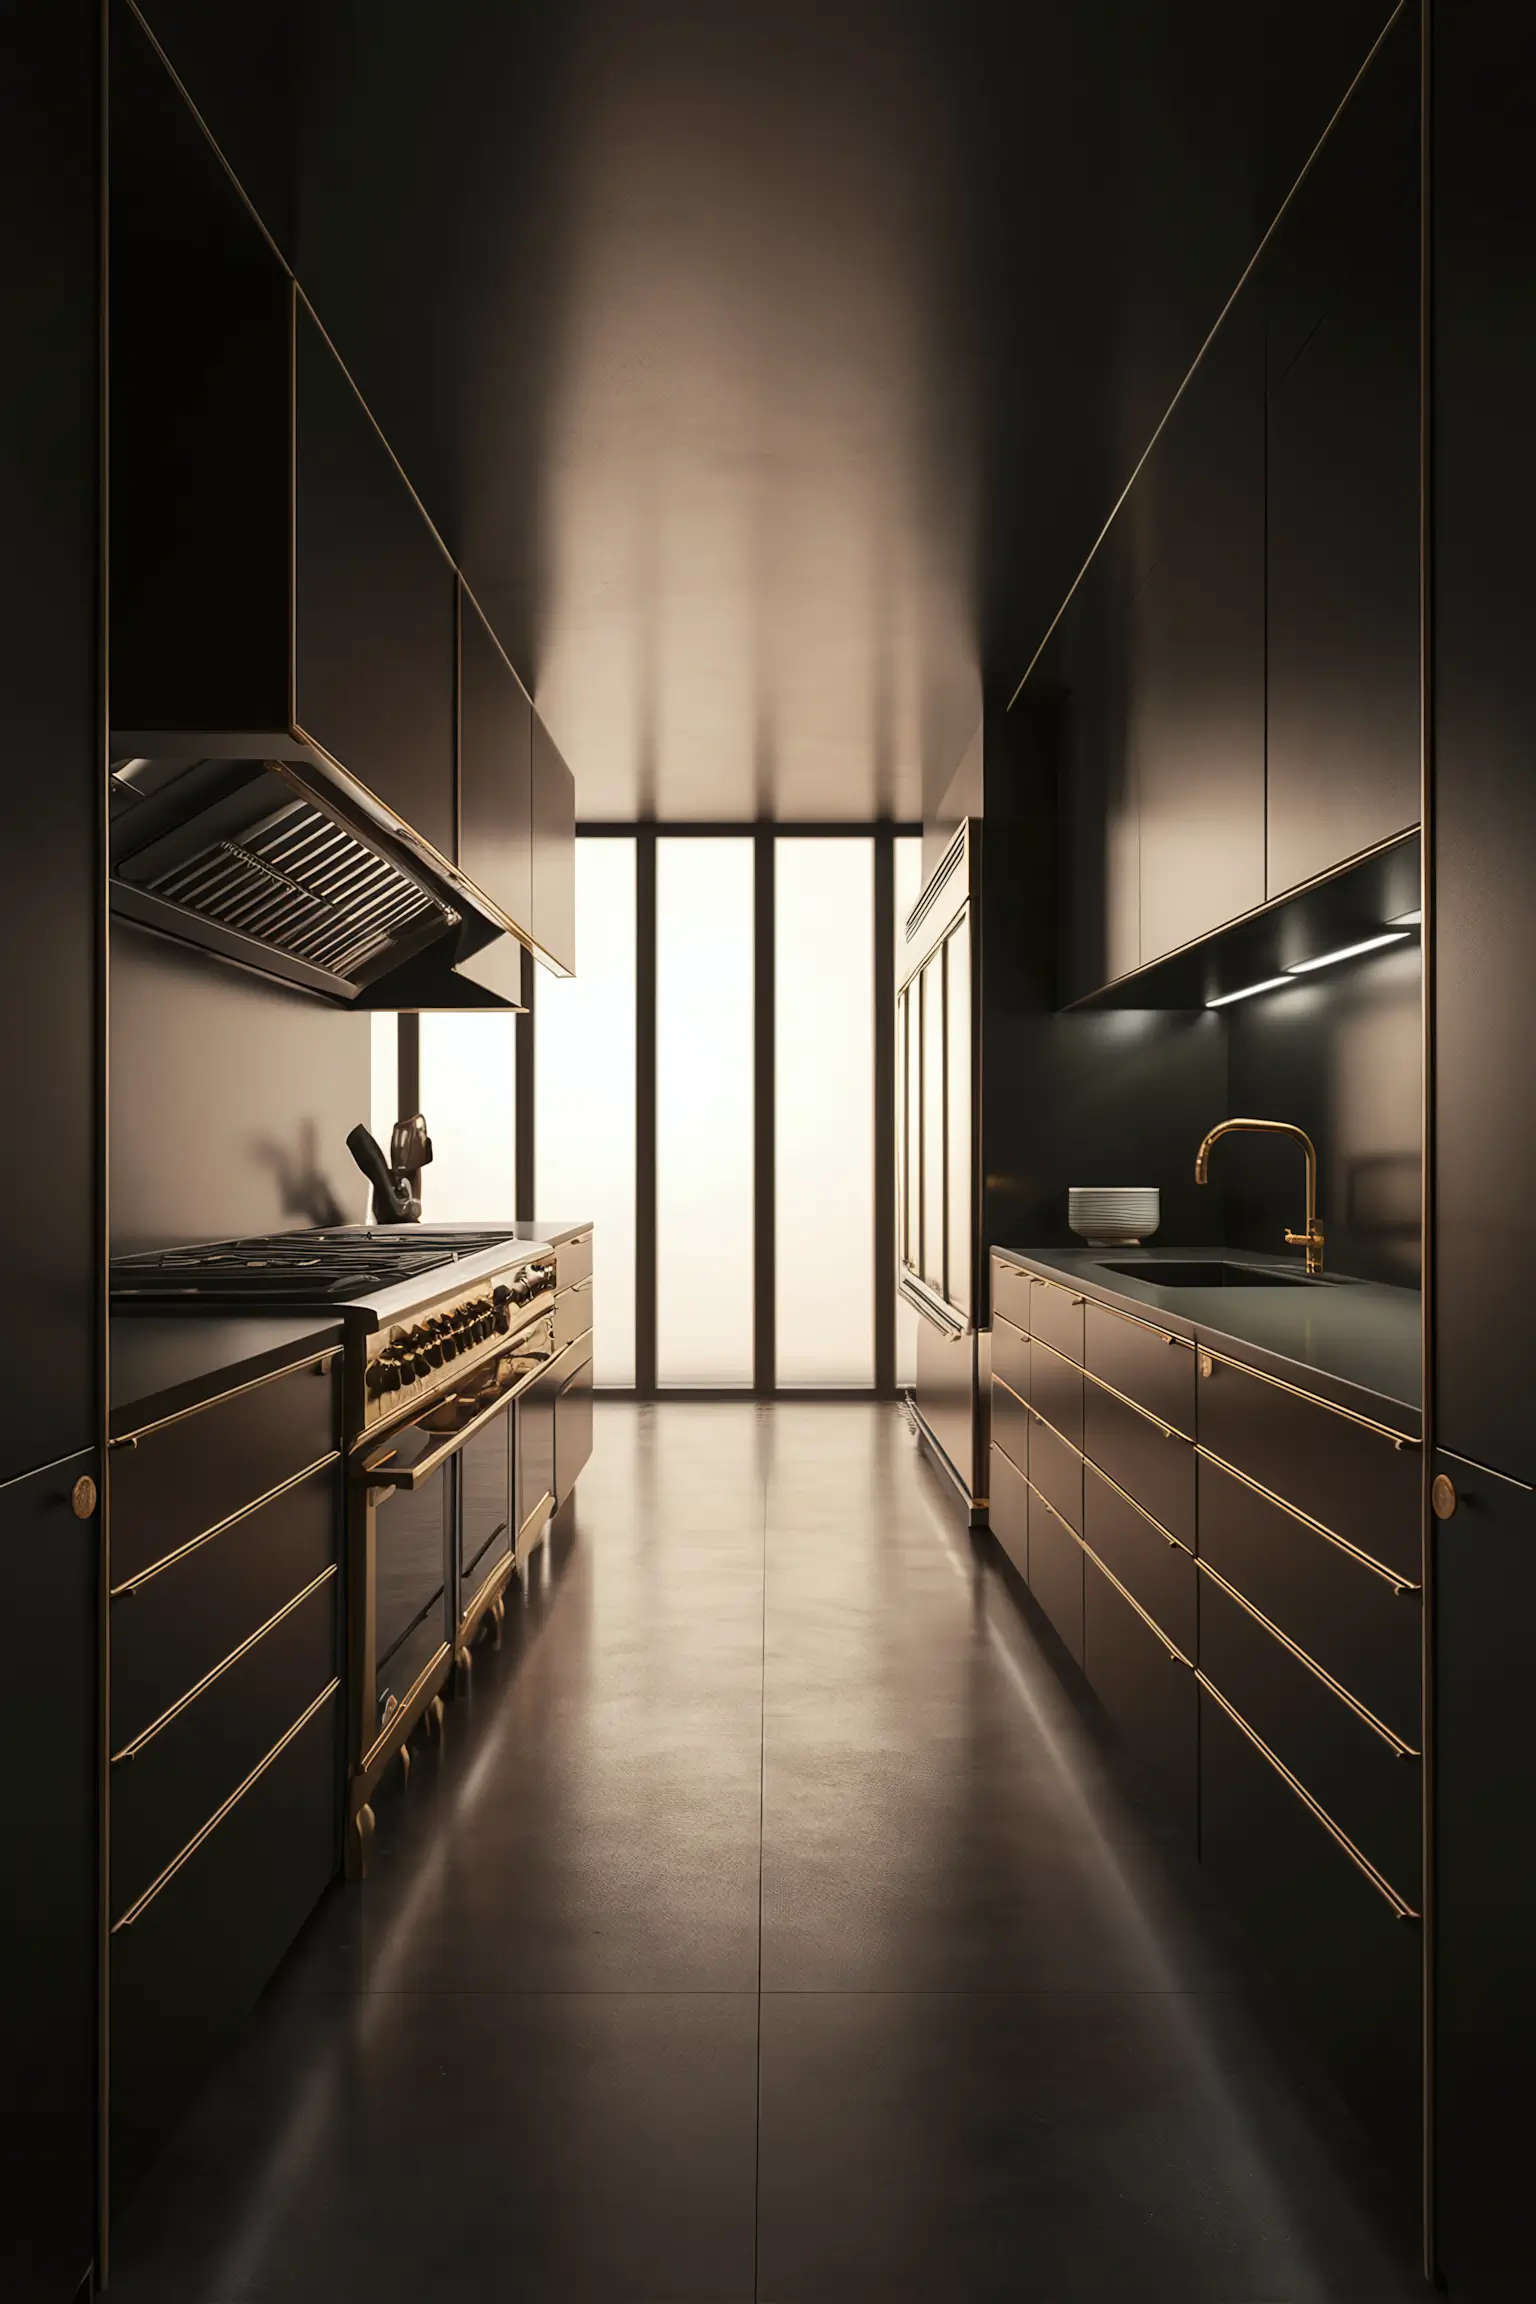 Luxurious black and gold kitchen with opulent finishes and high-end appliances.